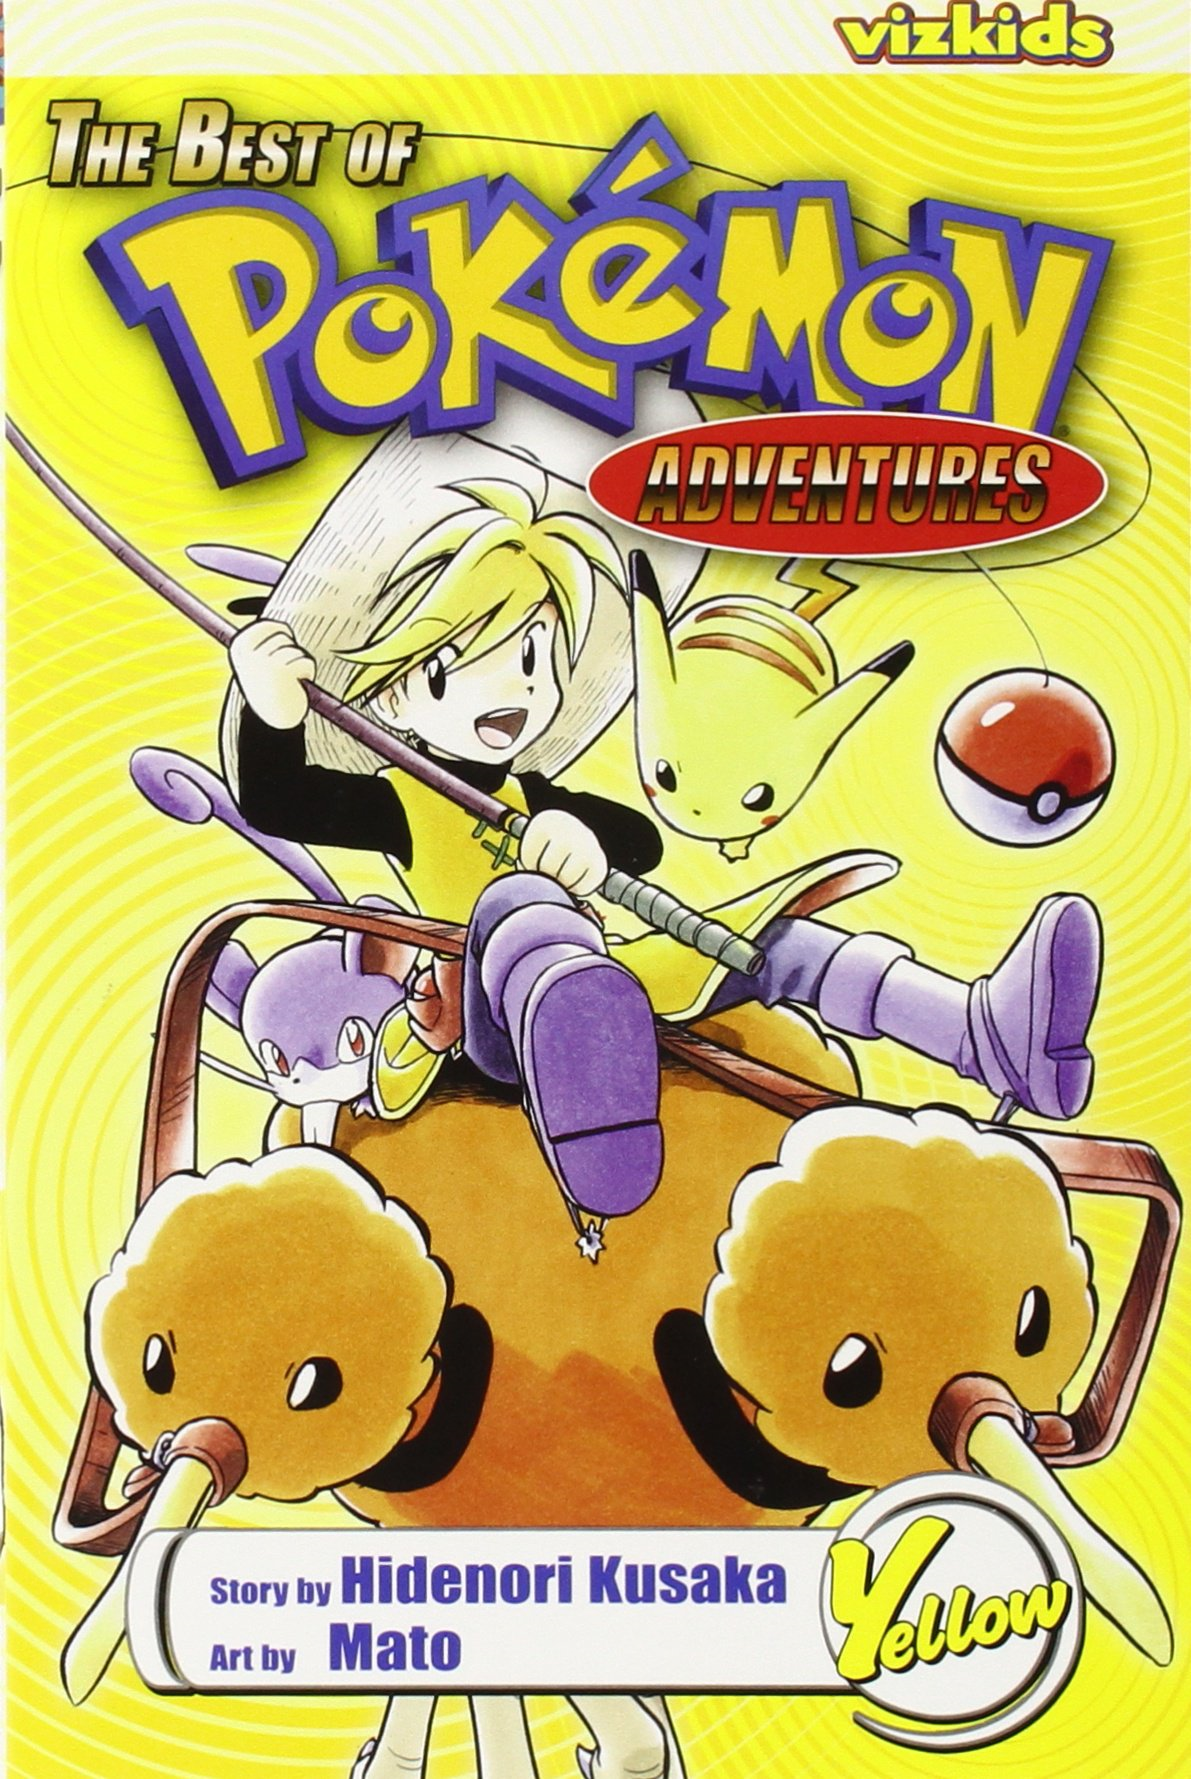 Pokémon Adventures (Red and Blue), Vol. 2, Book by Hidenori Kusaka, Mato, Official Publisher Page